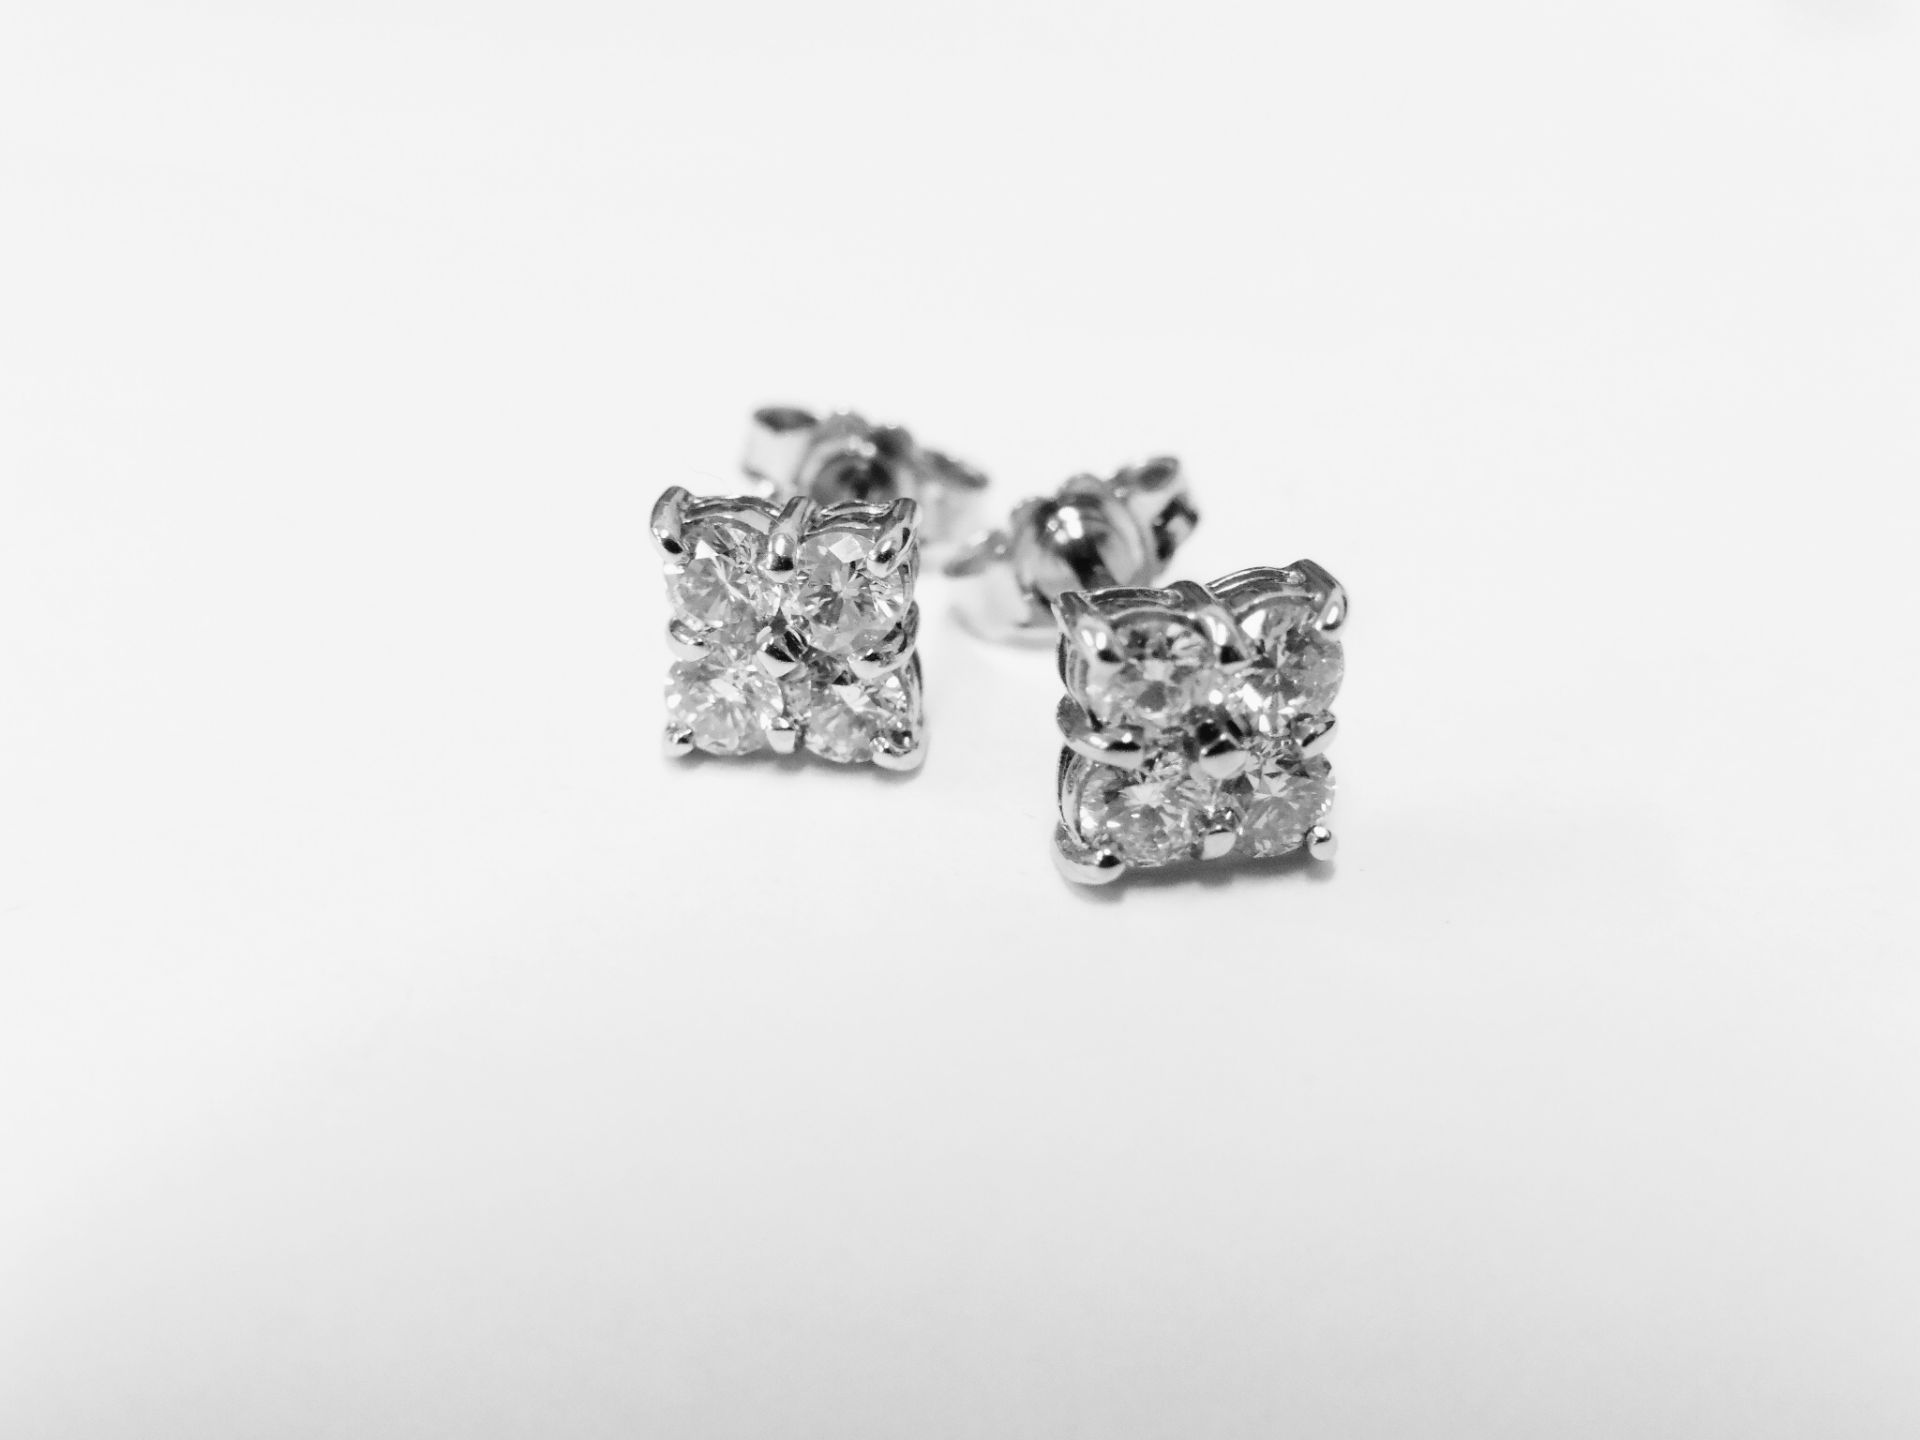 18ct diamond earrings,0.80ct in 8 stone 0.10ct each i si2 clarity and colour 2gms 18ct white gold uk